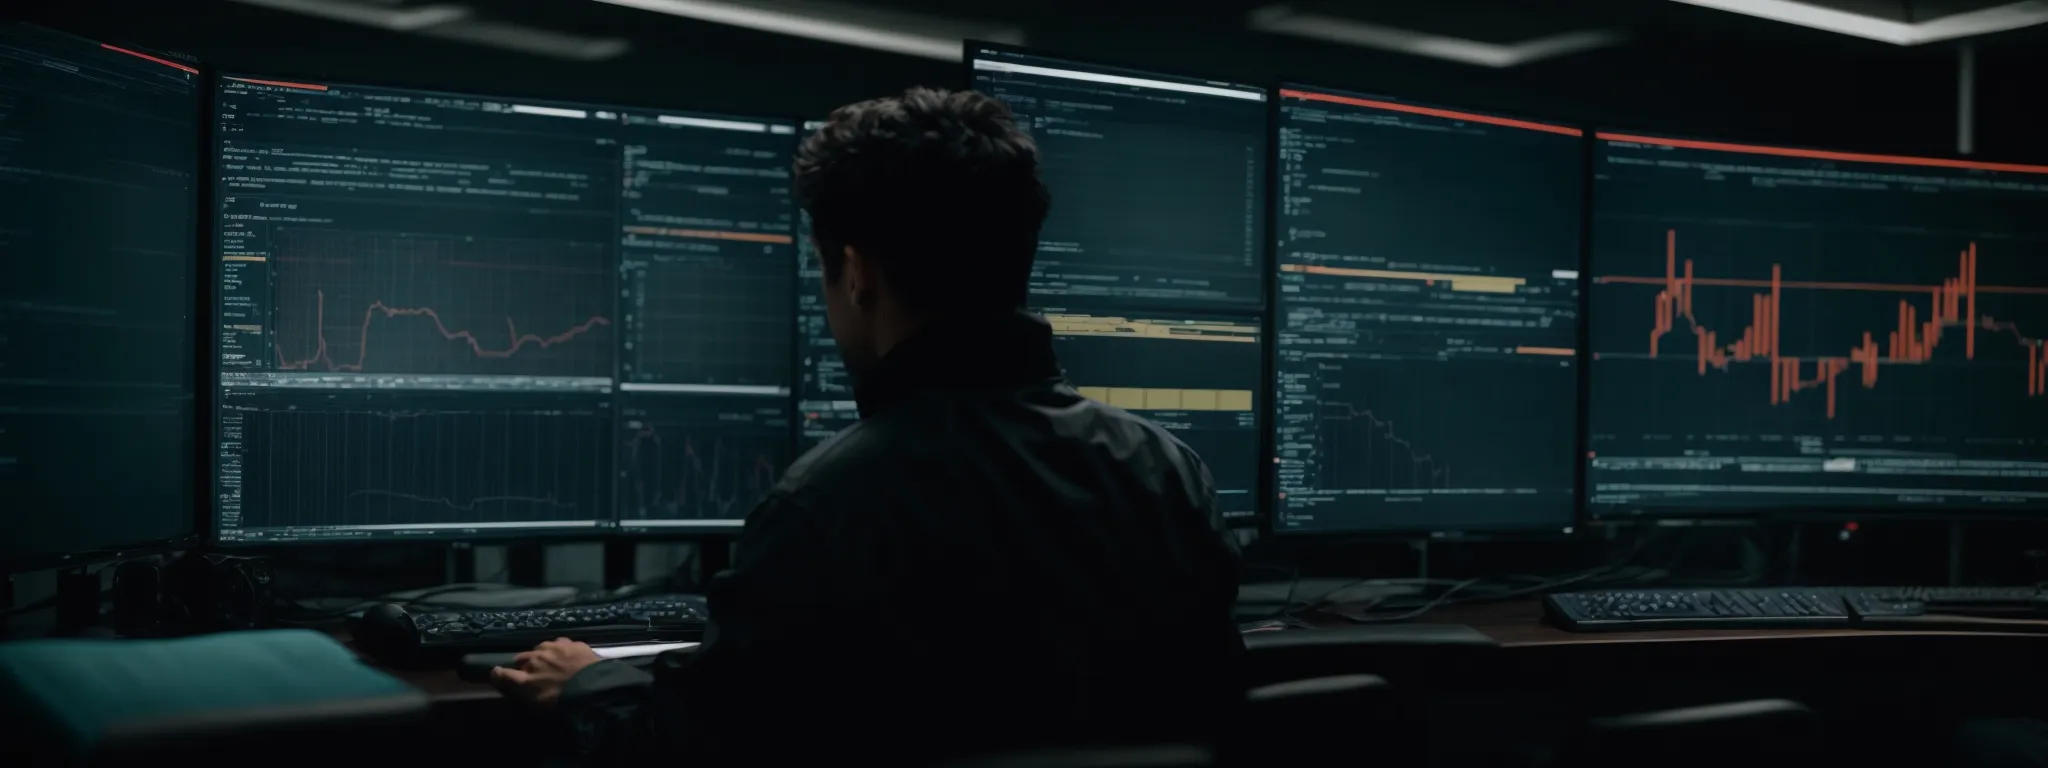 a web developer intently monitors a cybersecurity dashboard that displays website traffic and threat levels.